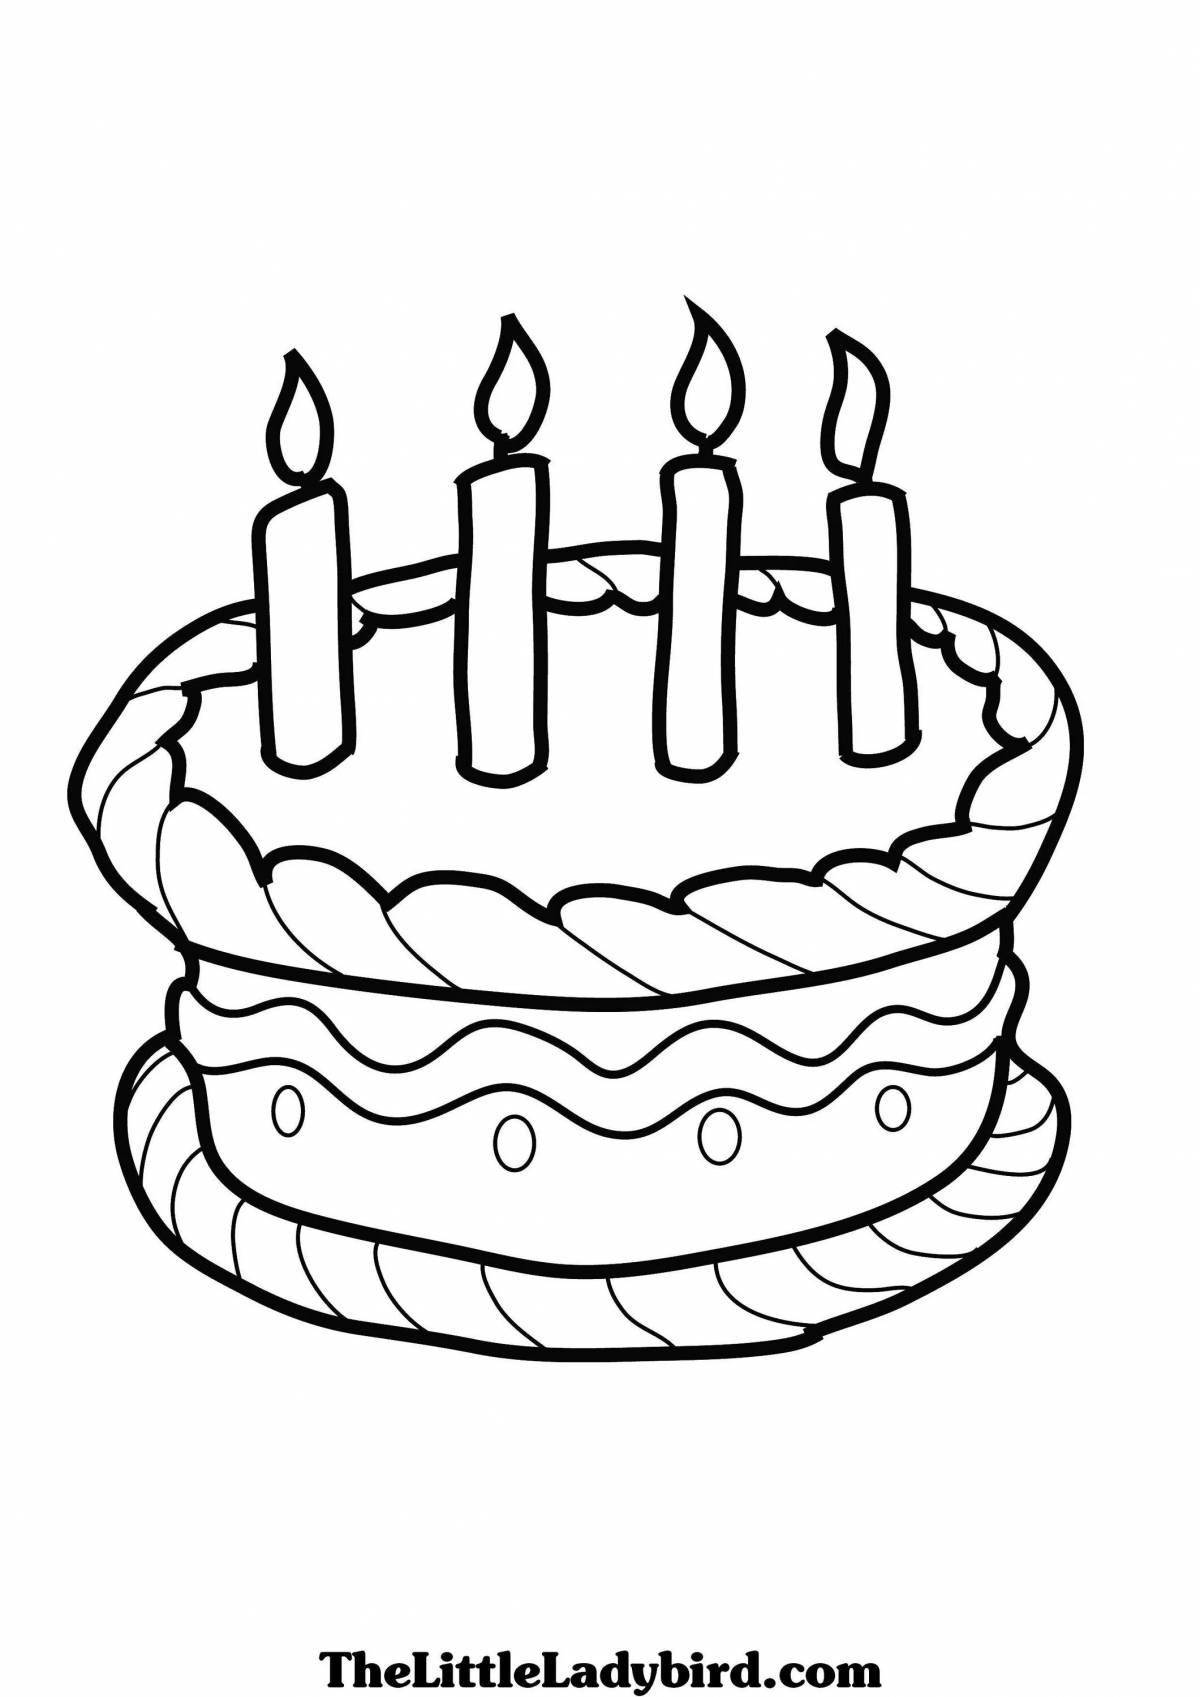 Birthday cake coloring book for 3-4 year olds